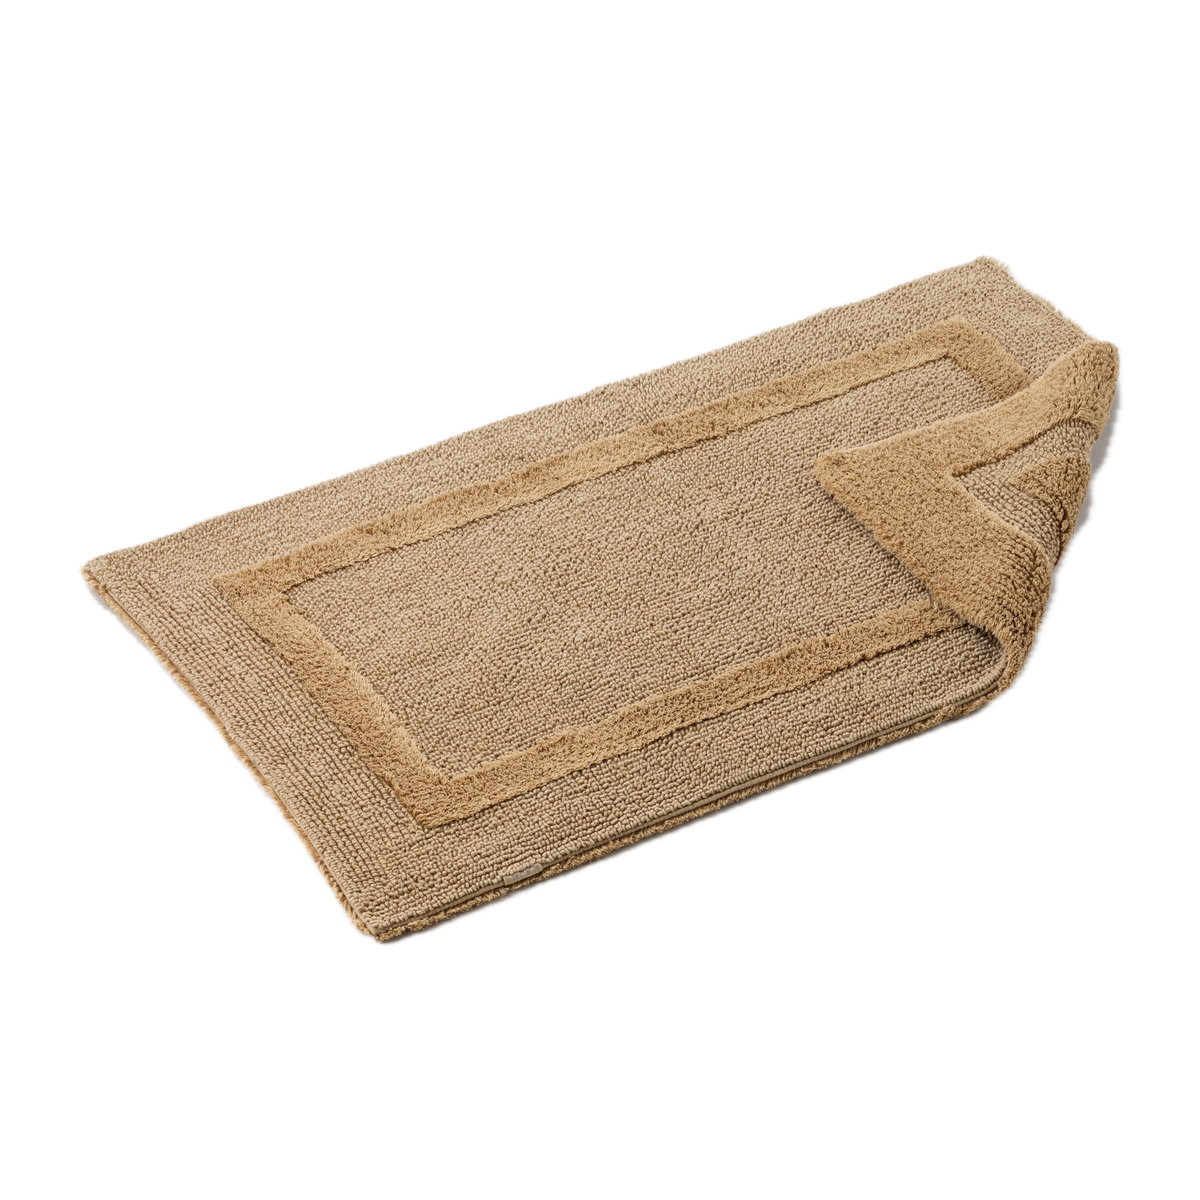 Tilted Image of Abyss Habidecor Reversible Bath Rug in Croissant Color